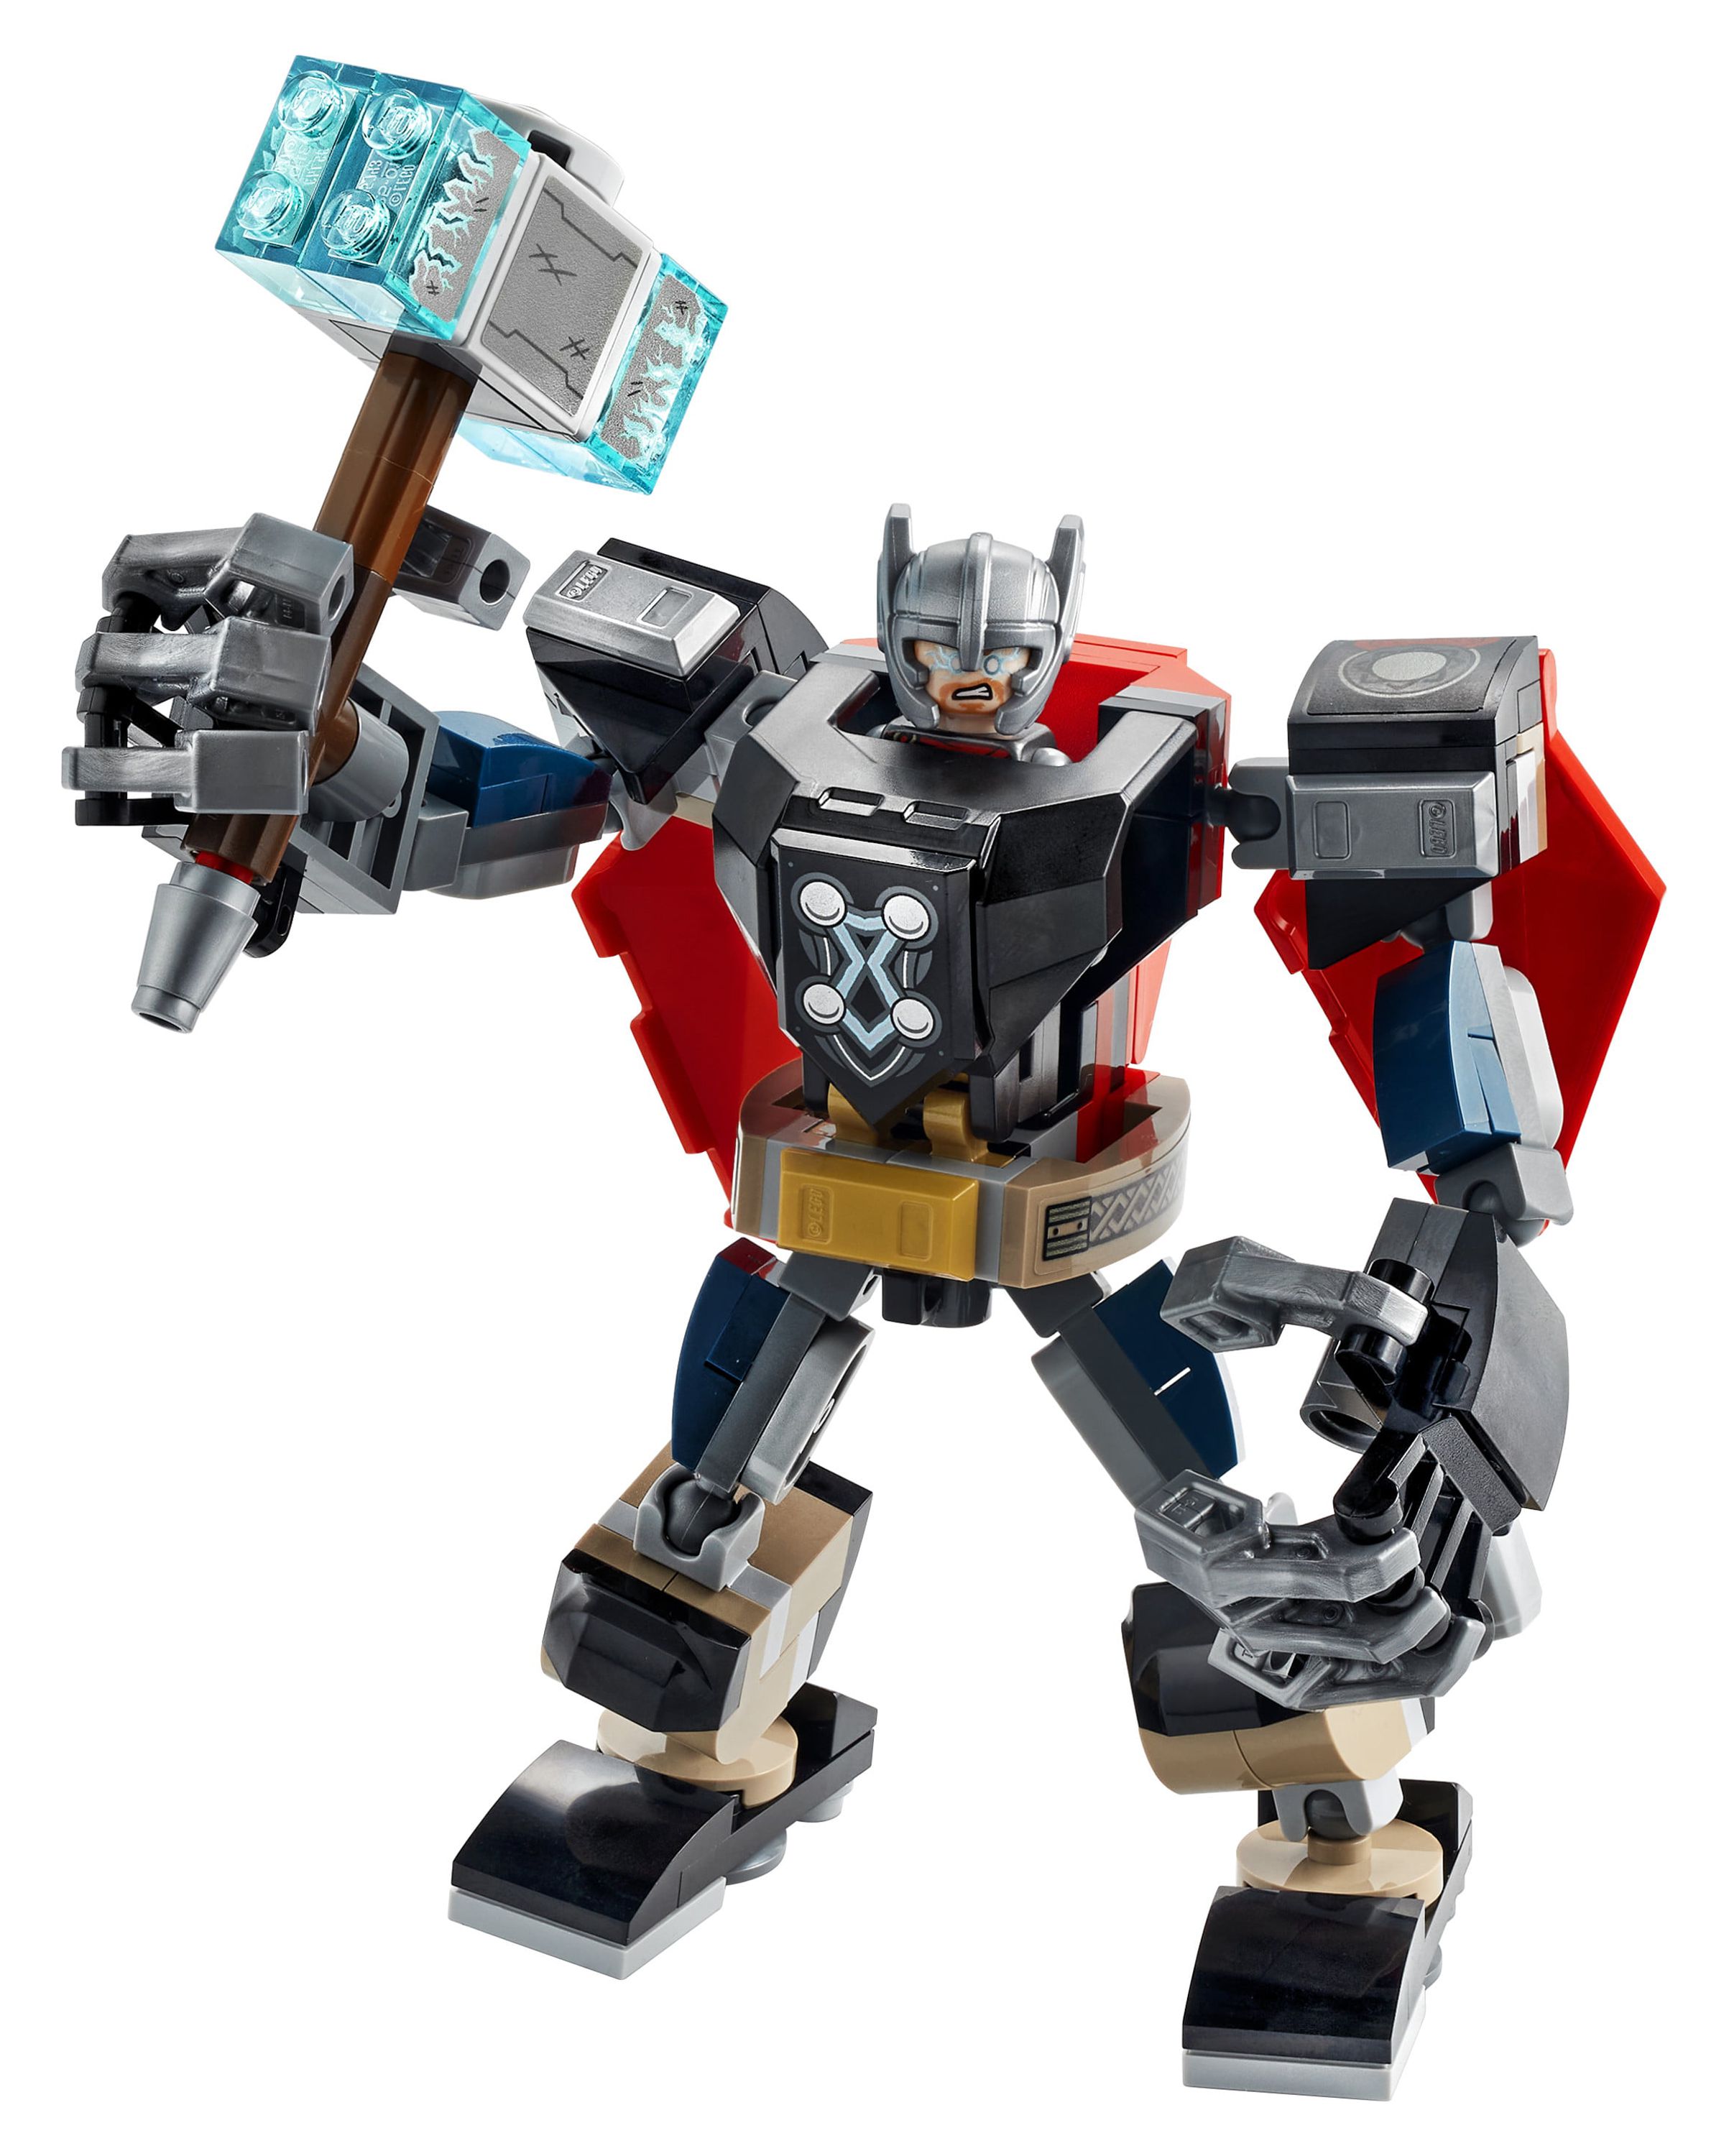 LEGO Marvel Avengers Classic Thor Mech Armor 76169 Cool Thor Hammer Playset (139 Pieces) - image 3 of 8